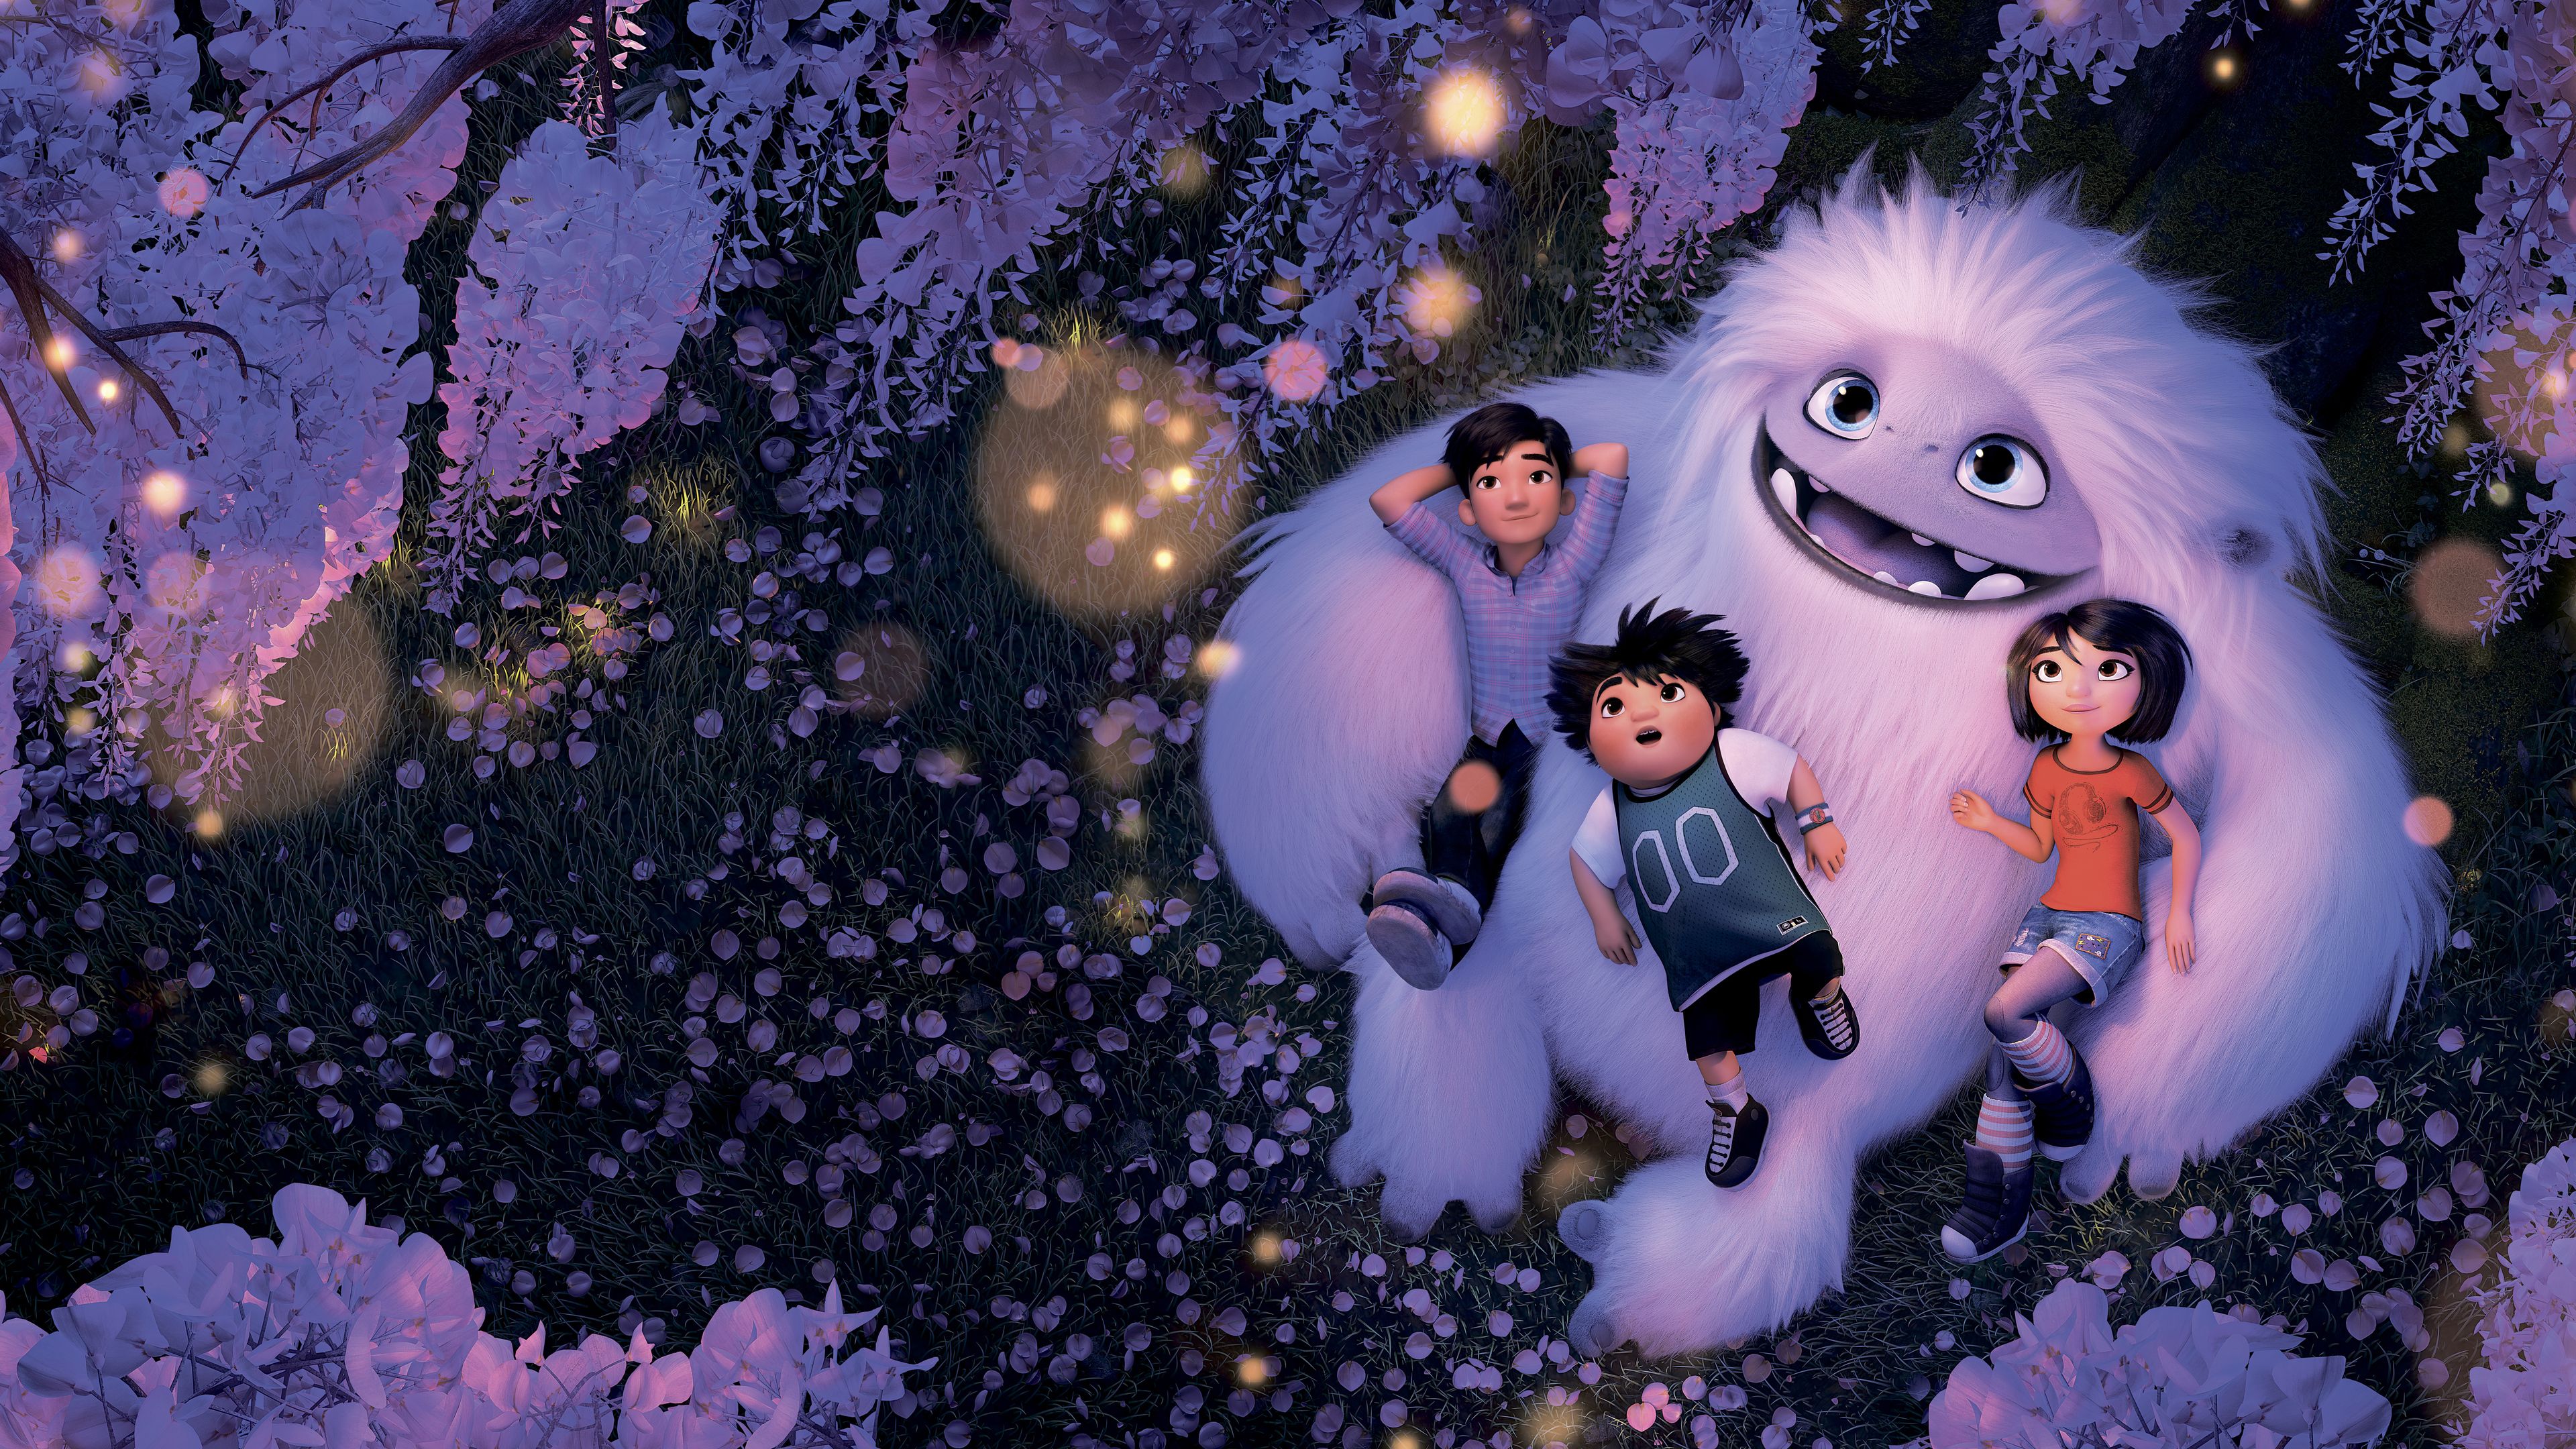 Wallpaper 4k 2019 Abominable Animated Movie 2019 Movies Wallpaper, 4k Wallpaper, 5k Wallpaper, 8k Wallpaper, Abominable Wallpaper, Animated Movies Wallpaper, Hd Wallpaper